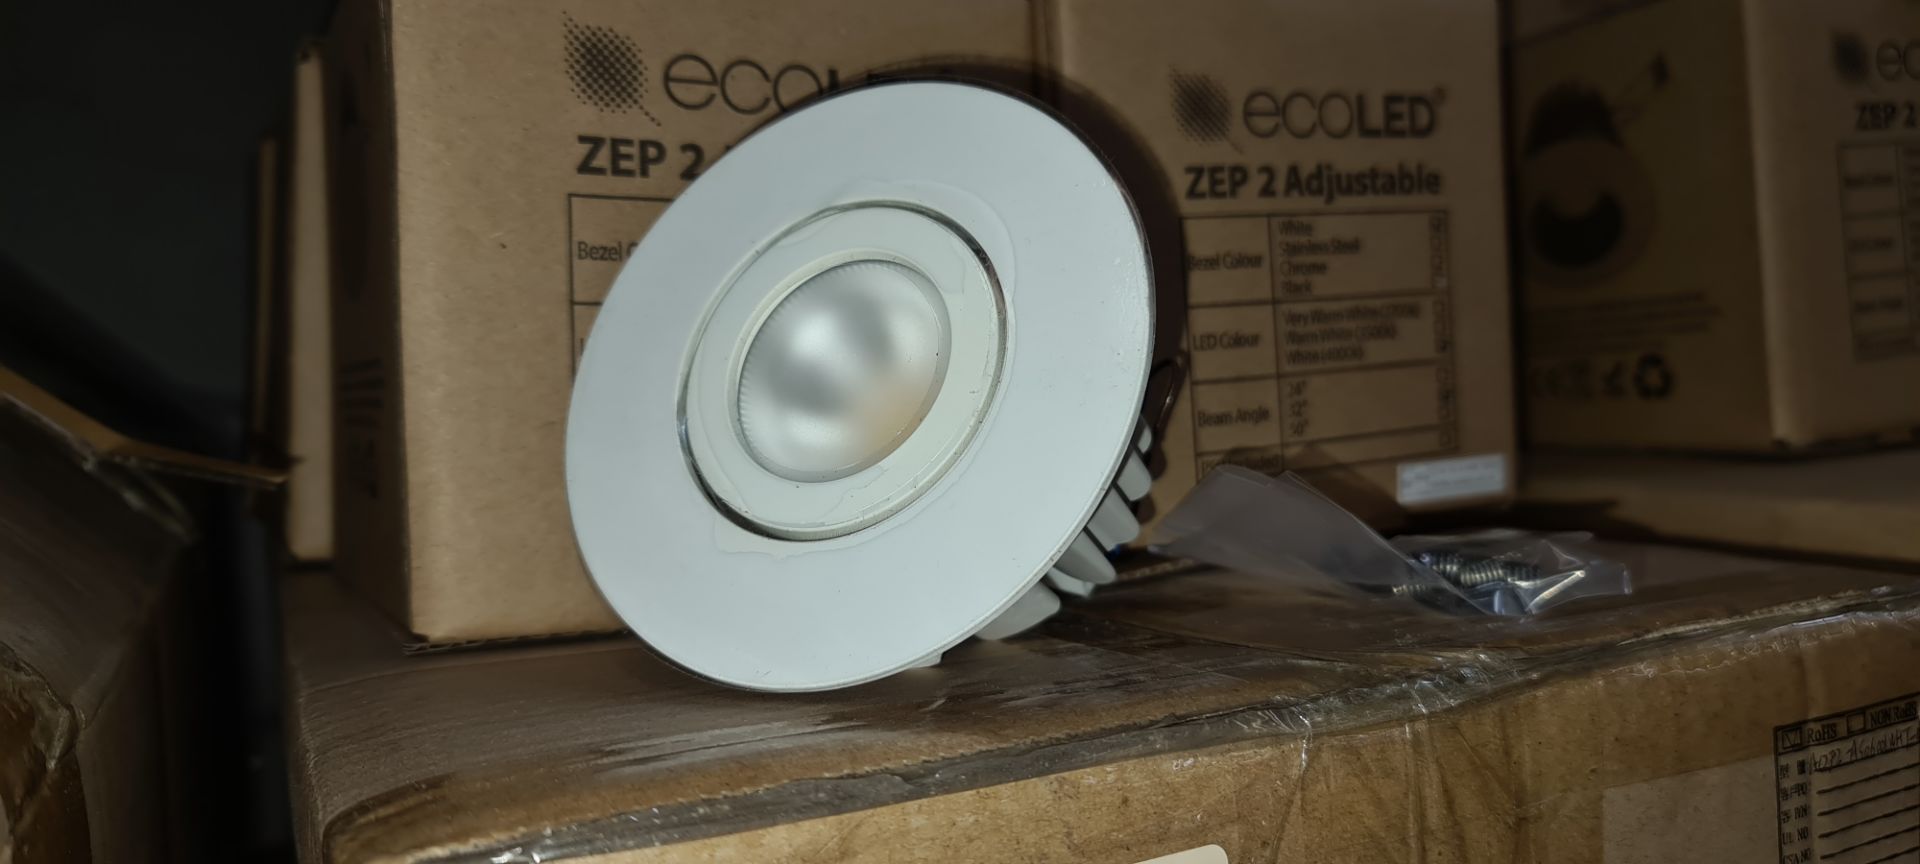 26 off EcoLED ZEP2 fixed white downlights, 4000K, model Z2-F-W-10-40-80-45-D4 - 2 boxes & 6 individu - Image 6 of 10